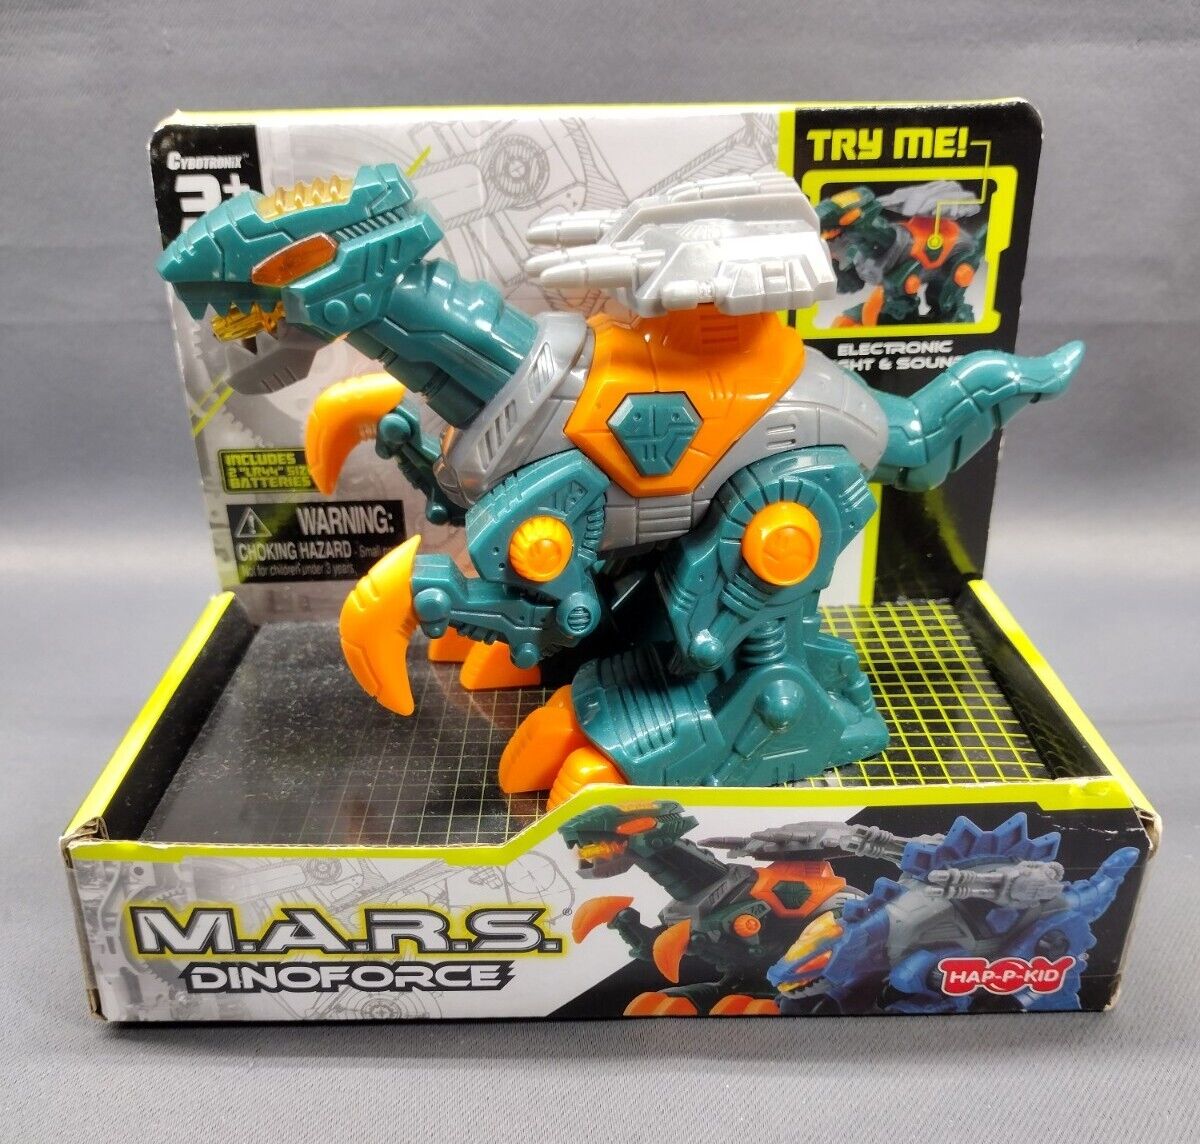 💥Cybotronic Electronic Light & Sound M.A.R.S. DINOFORCE Hap-P-Kid Toy Group HAP-P-KID None